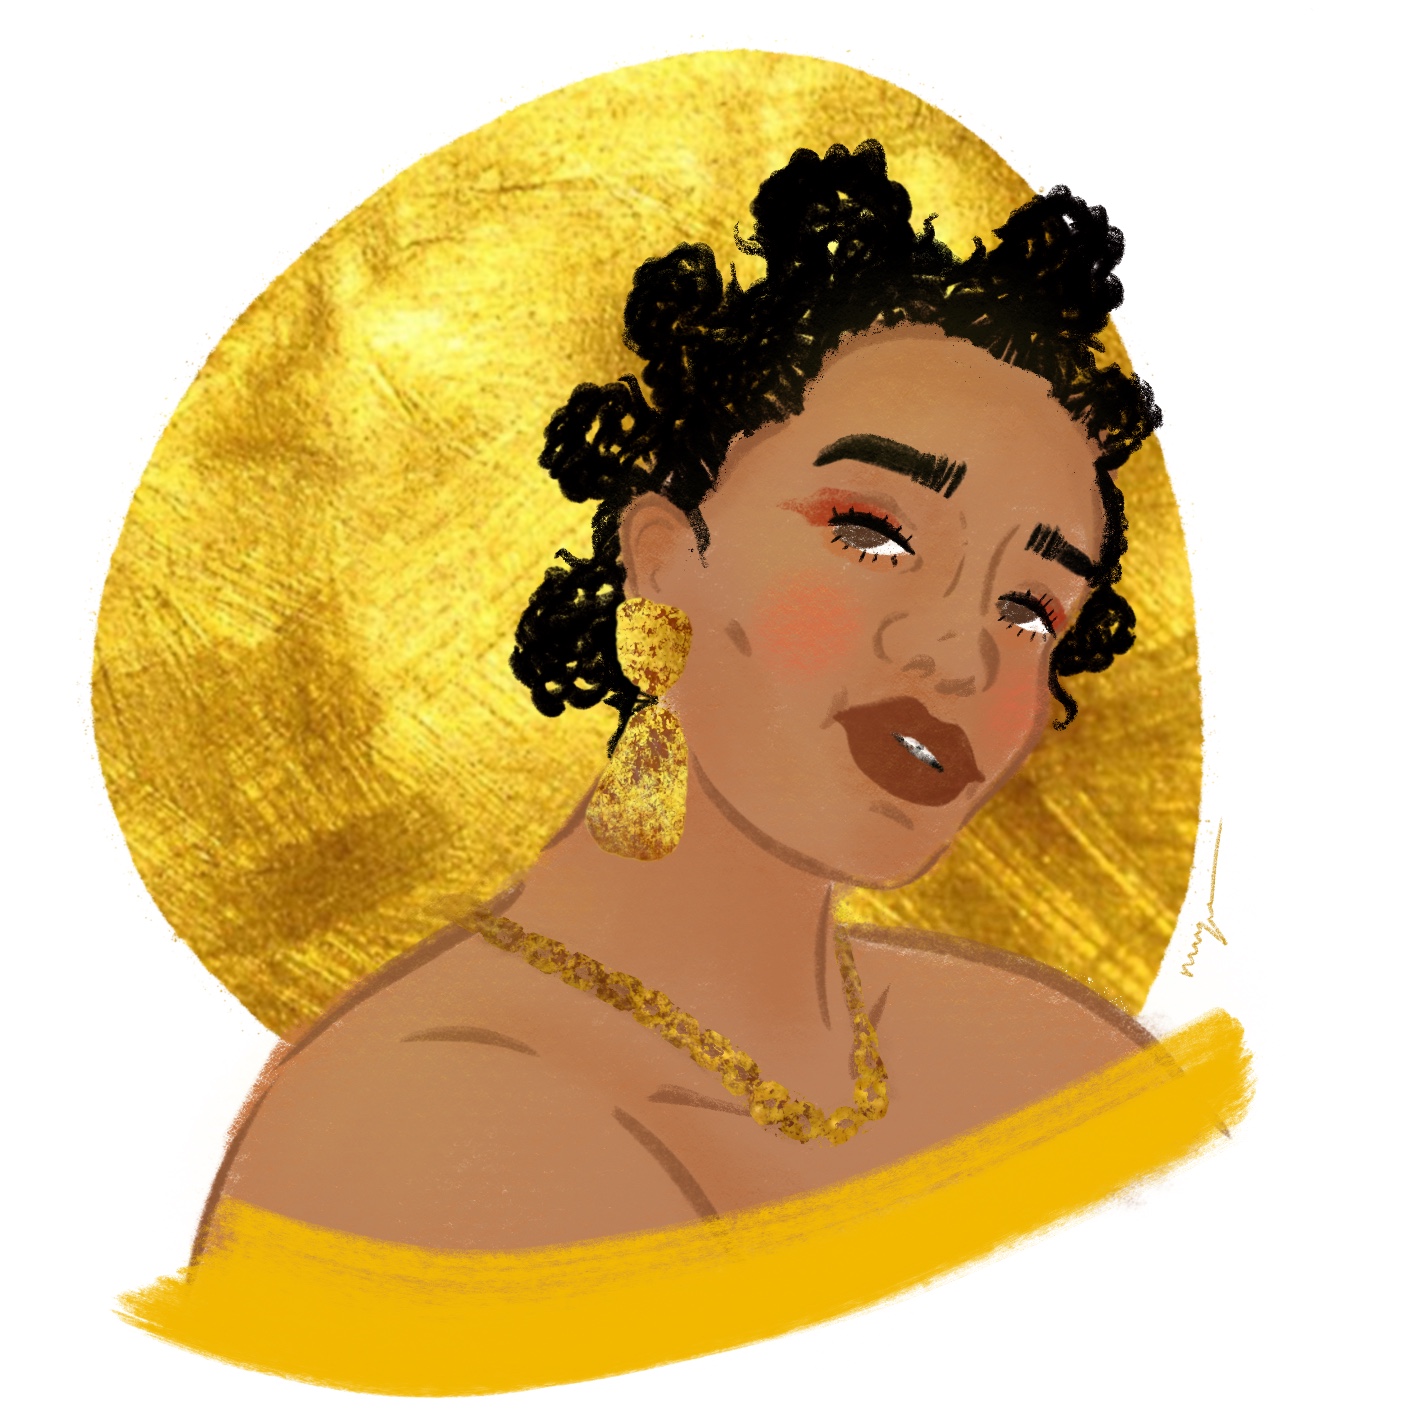 A portrait of a person with a big earrings